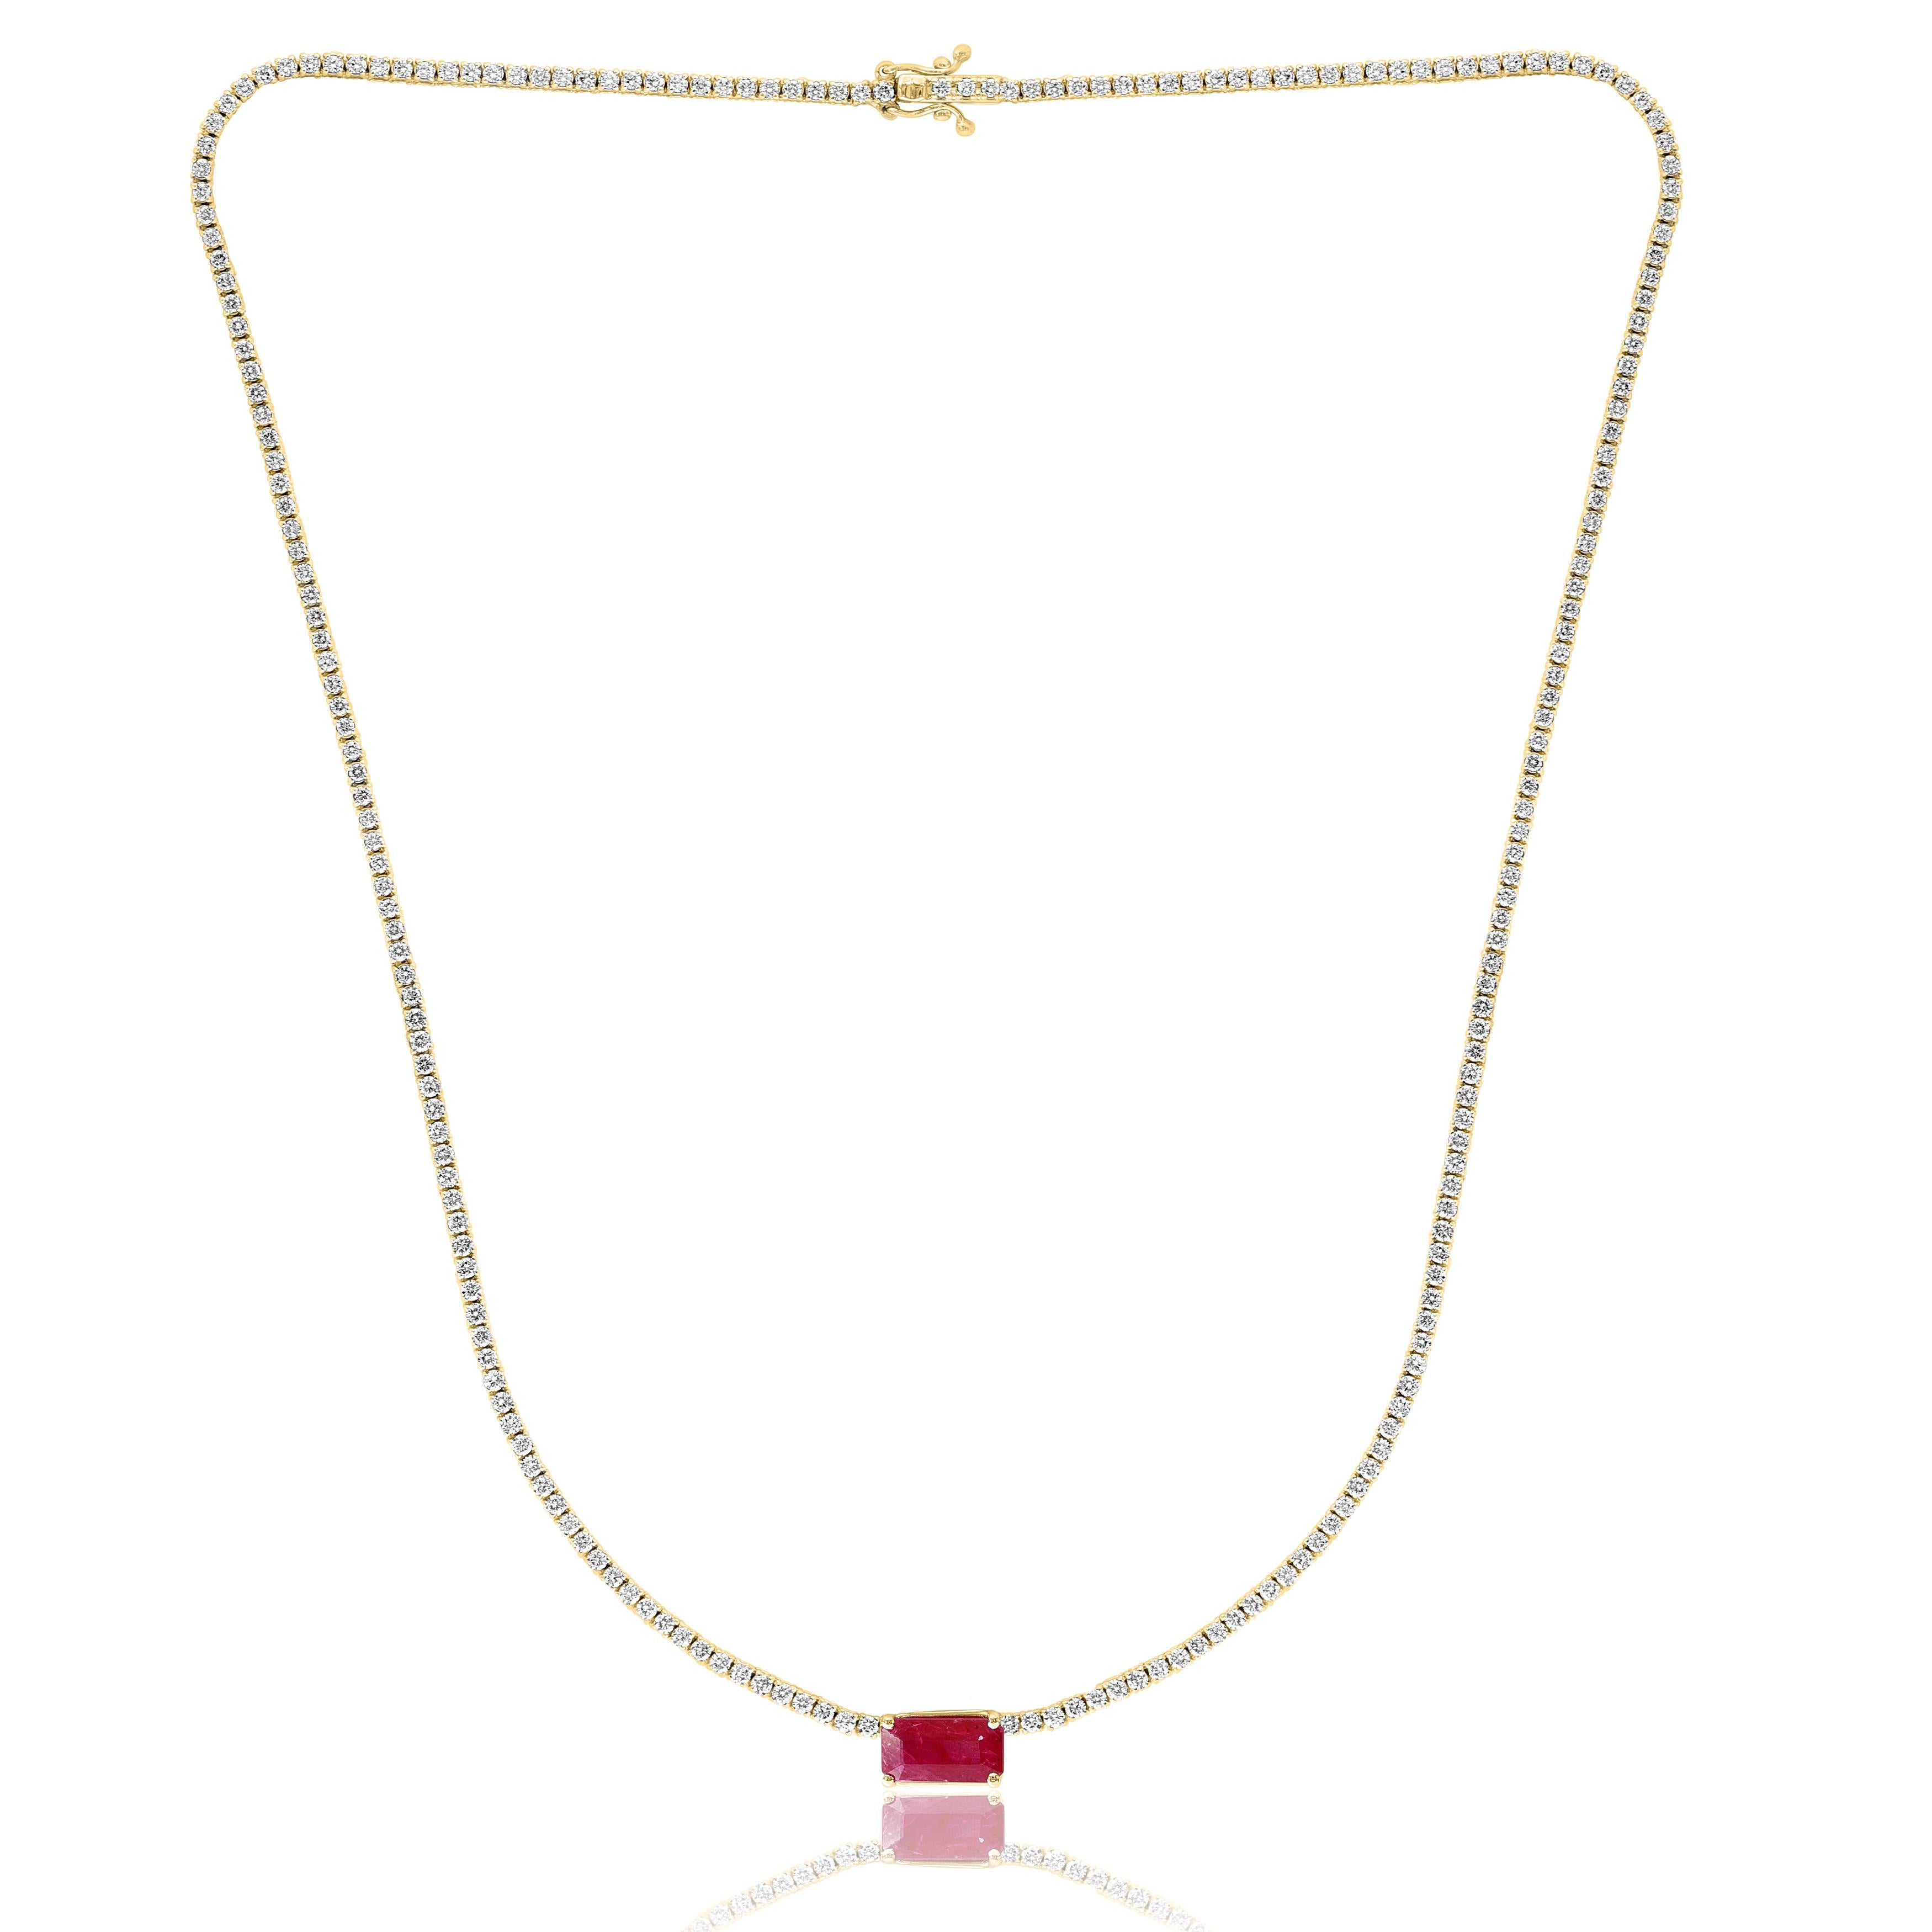 1.49 Carat Emerald Cut Ruby and Diamond Tennis Necklace in 14K Yellow Gold For Sale